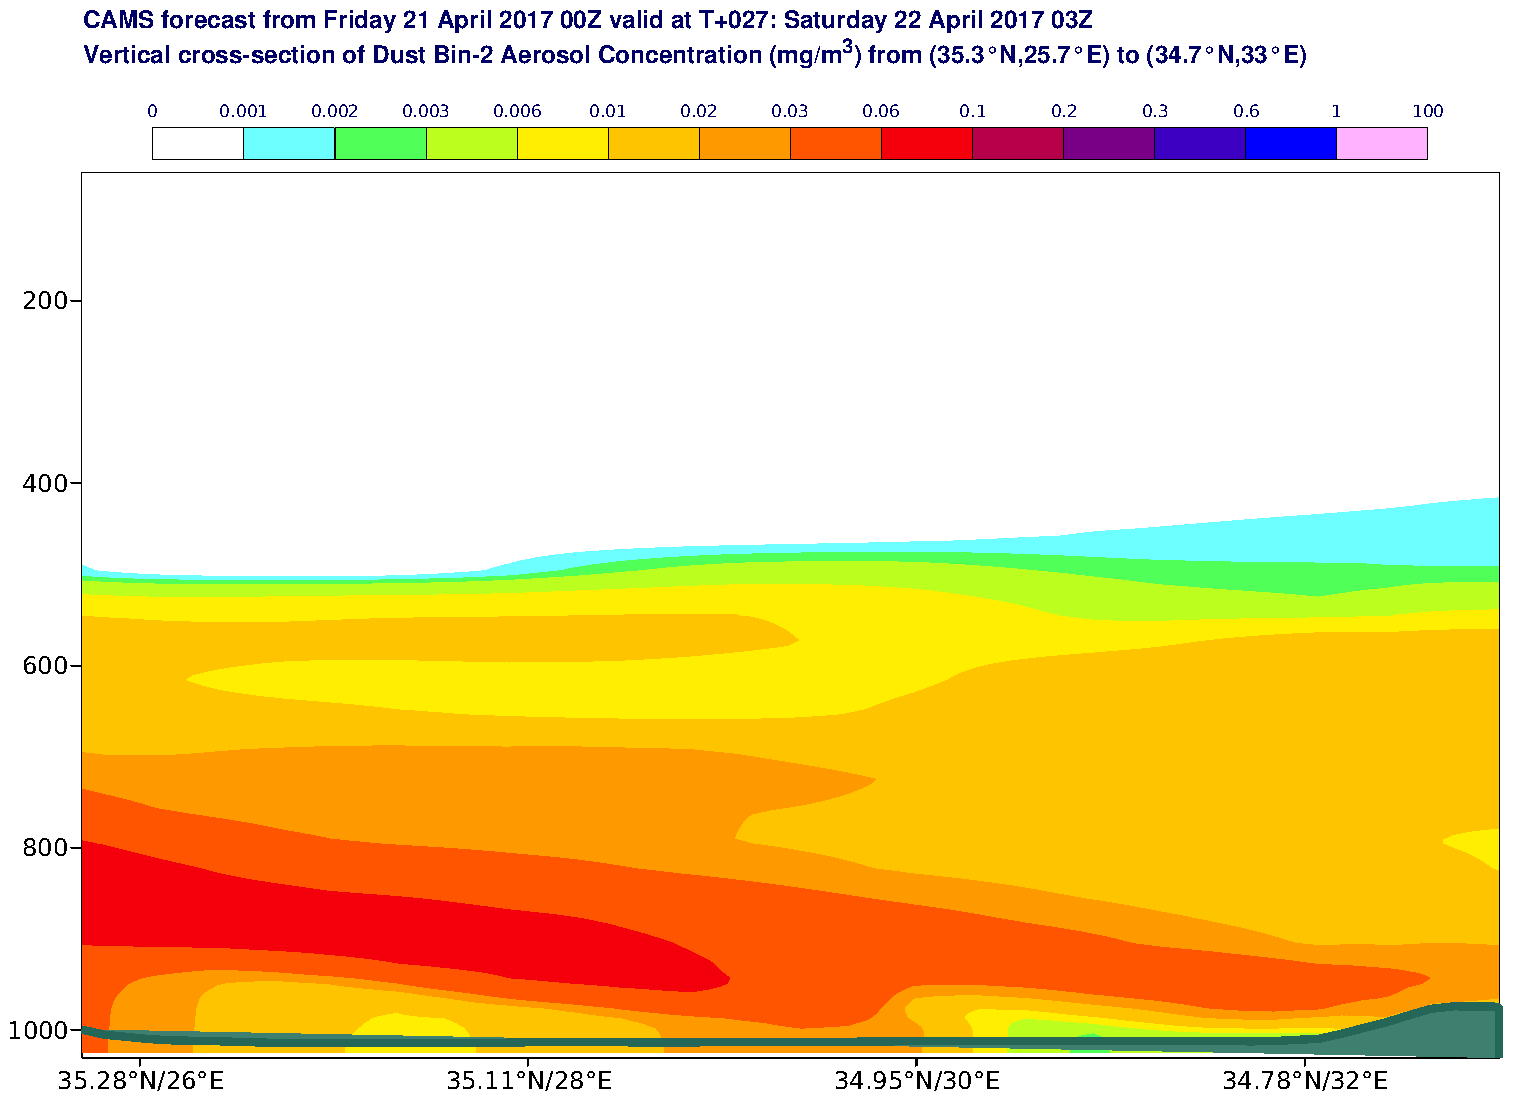 Vertical cross-section of Dust Bin-2 Aerosol Concentration (mg/m3) valid at T27 - 2017-04-22 03:00